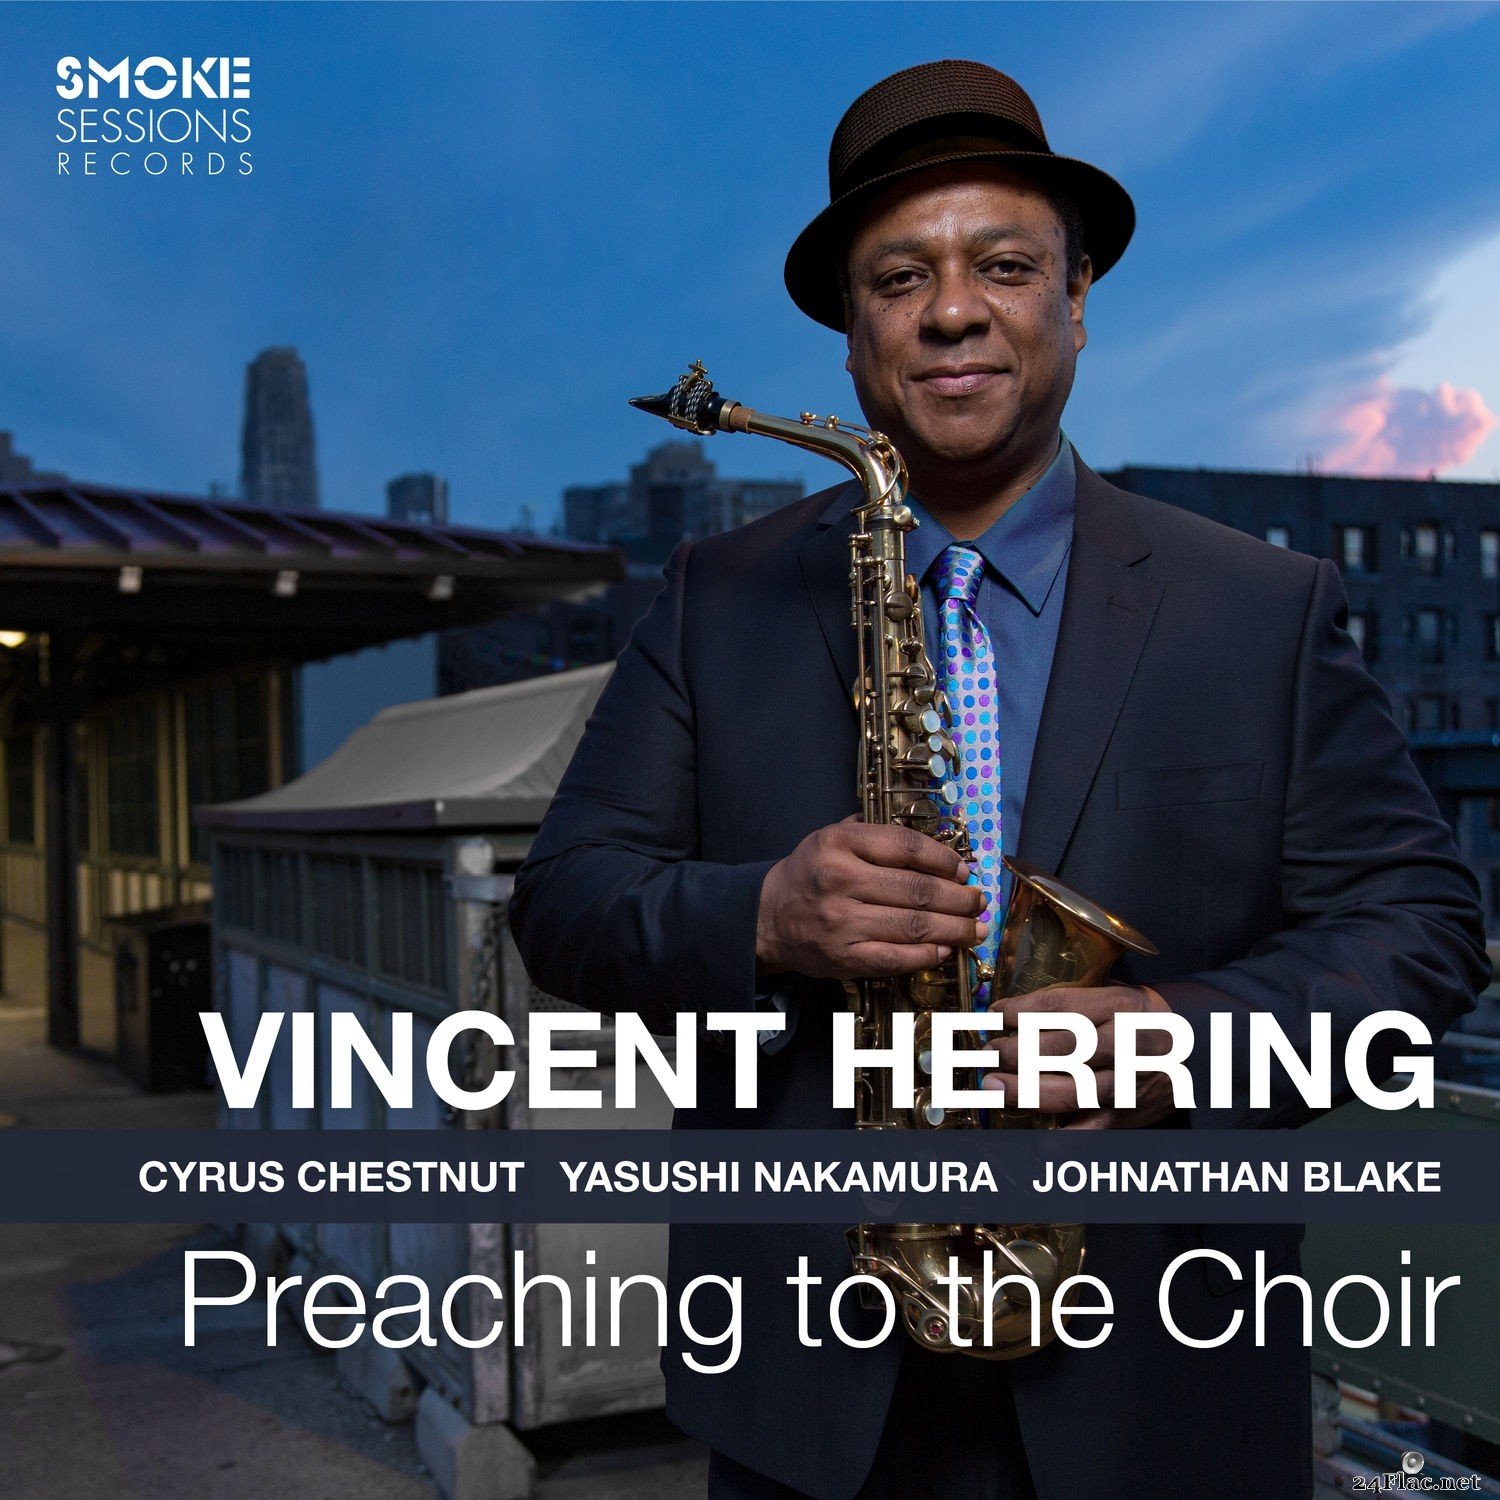 Vincent Herring - Preaching to the Choir (2021) Hi-Res